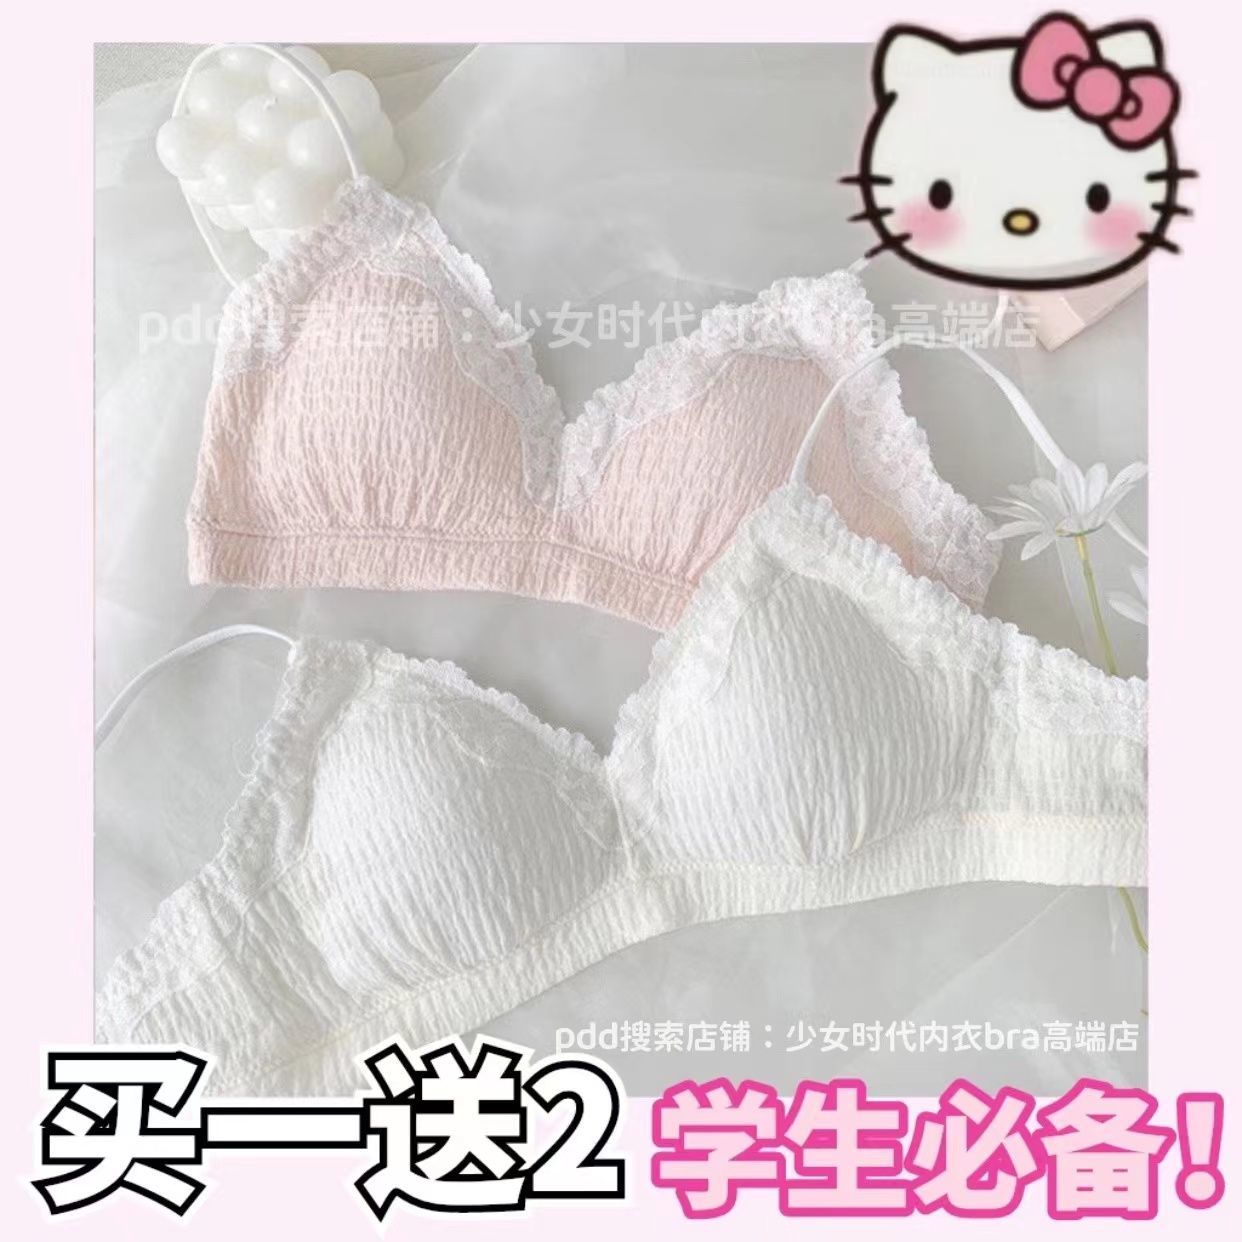 Pure desire style thin section small chest special underwear female Japanese girl lace edge bra without steel ring student bra set